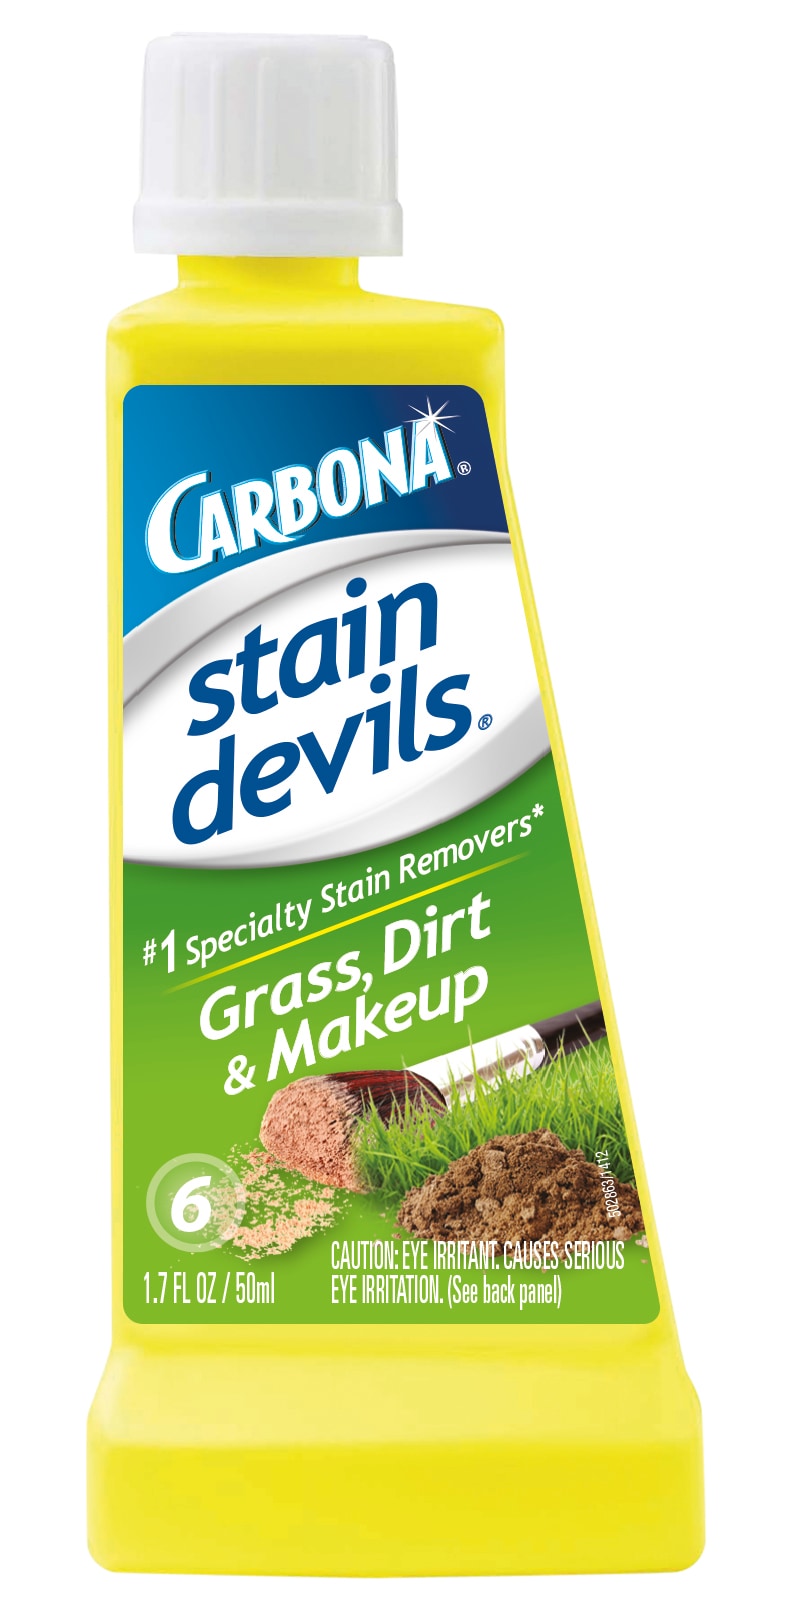 Carbona Stain Devils Stain Remover, 2 (Chocolate, Ketchup & Mustard) - 1.7 fl oz